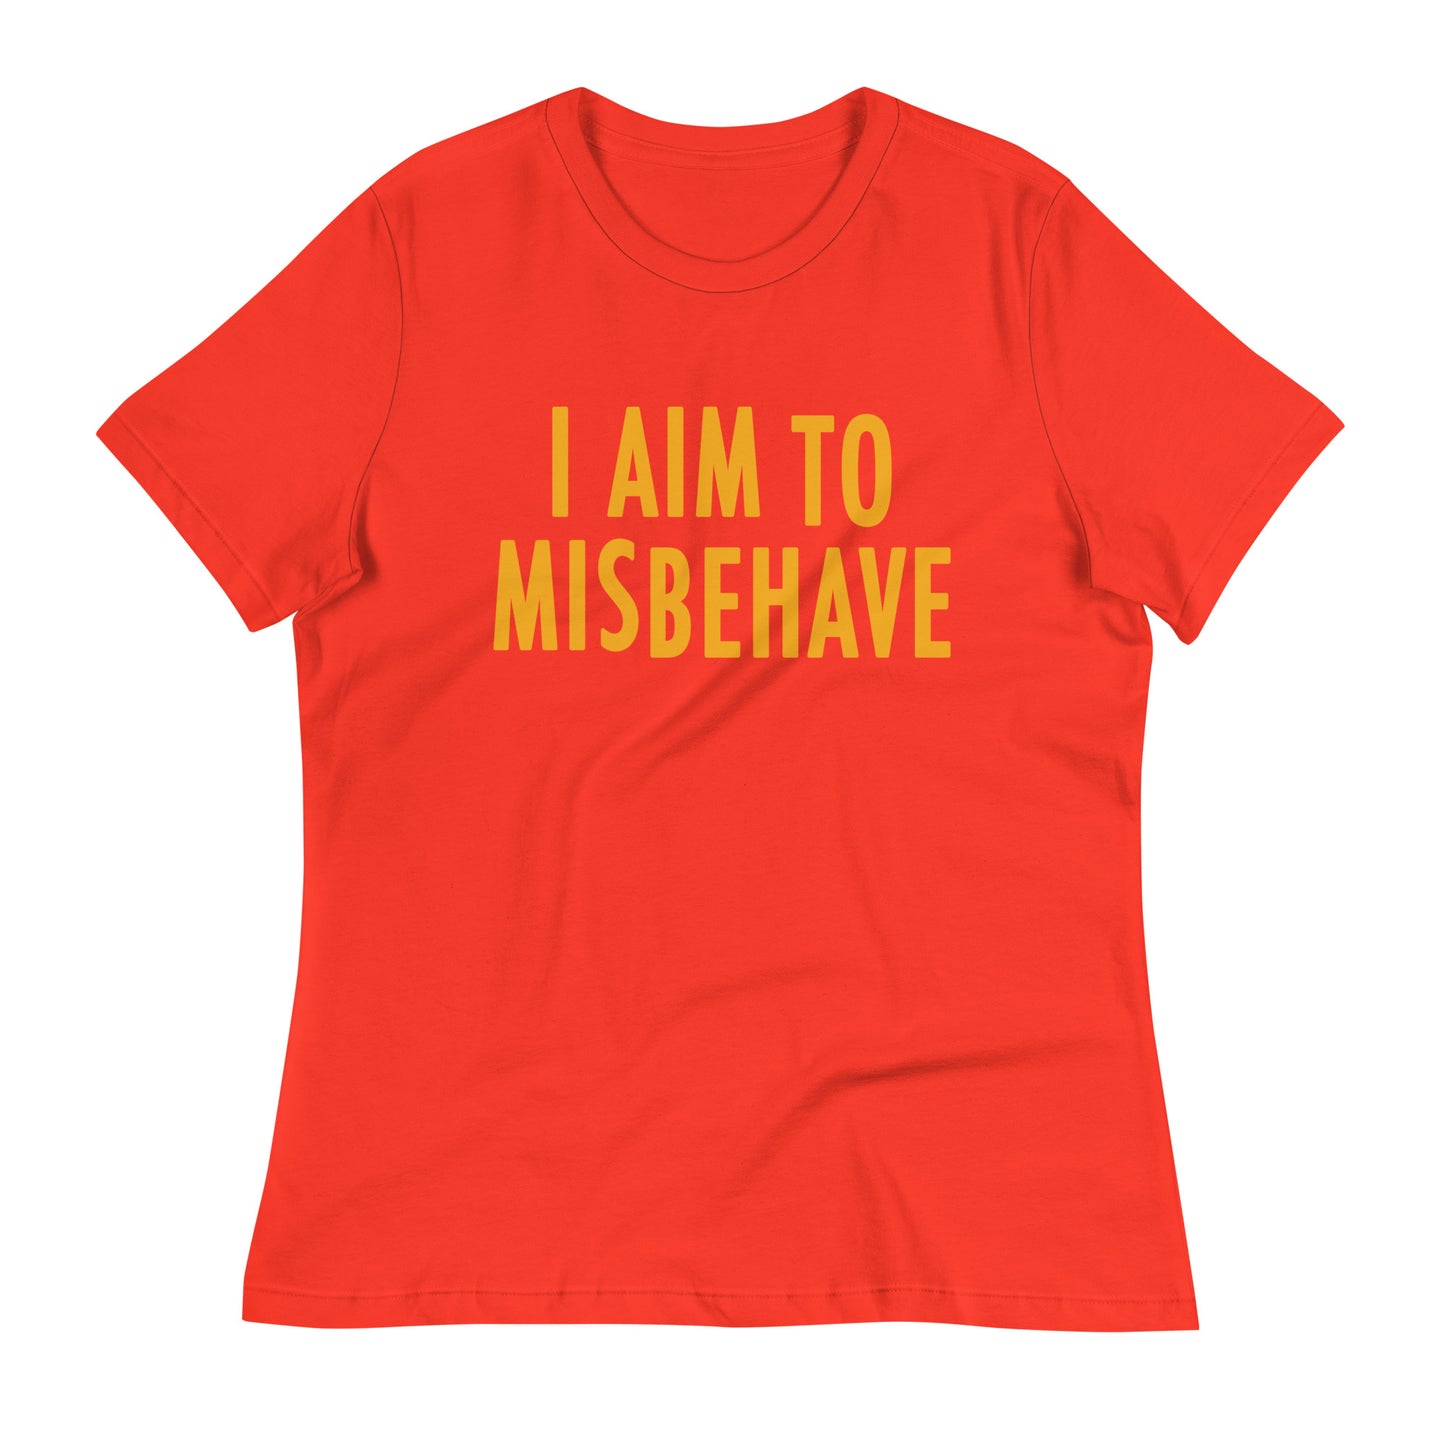 I Aim To Misbehave Women's Signature Tee